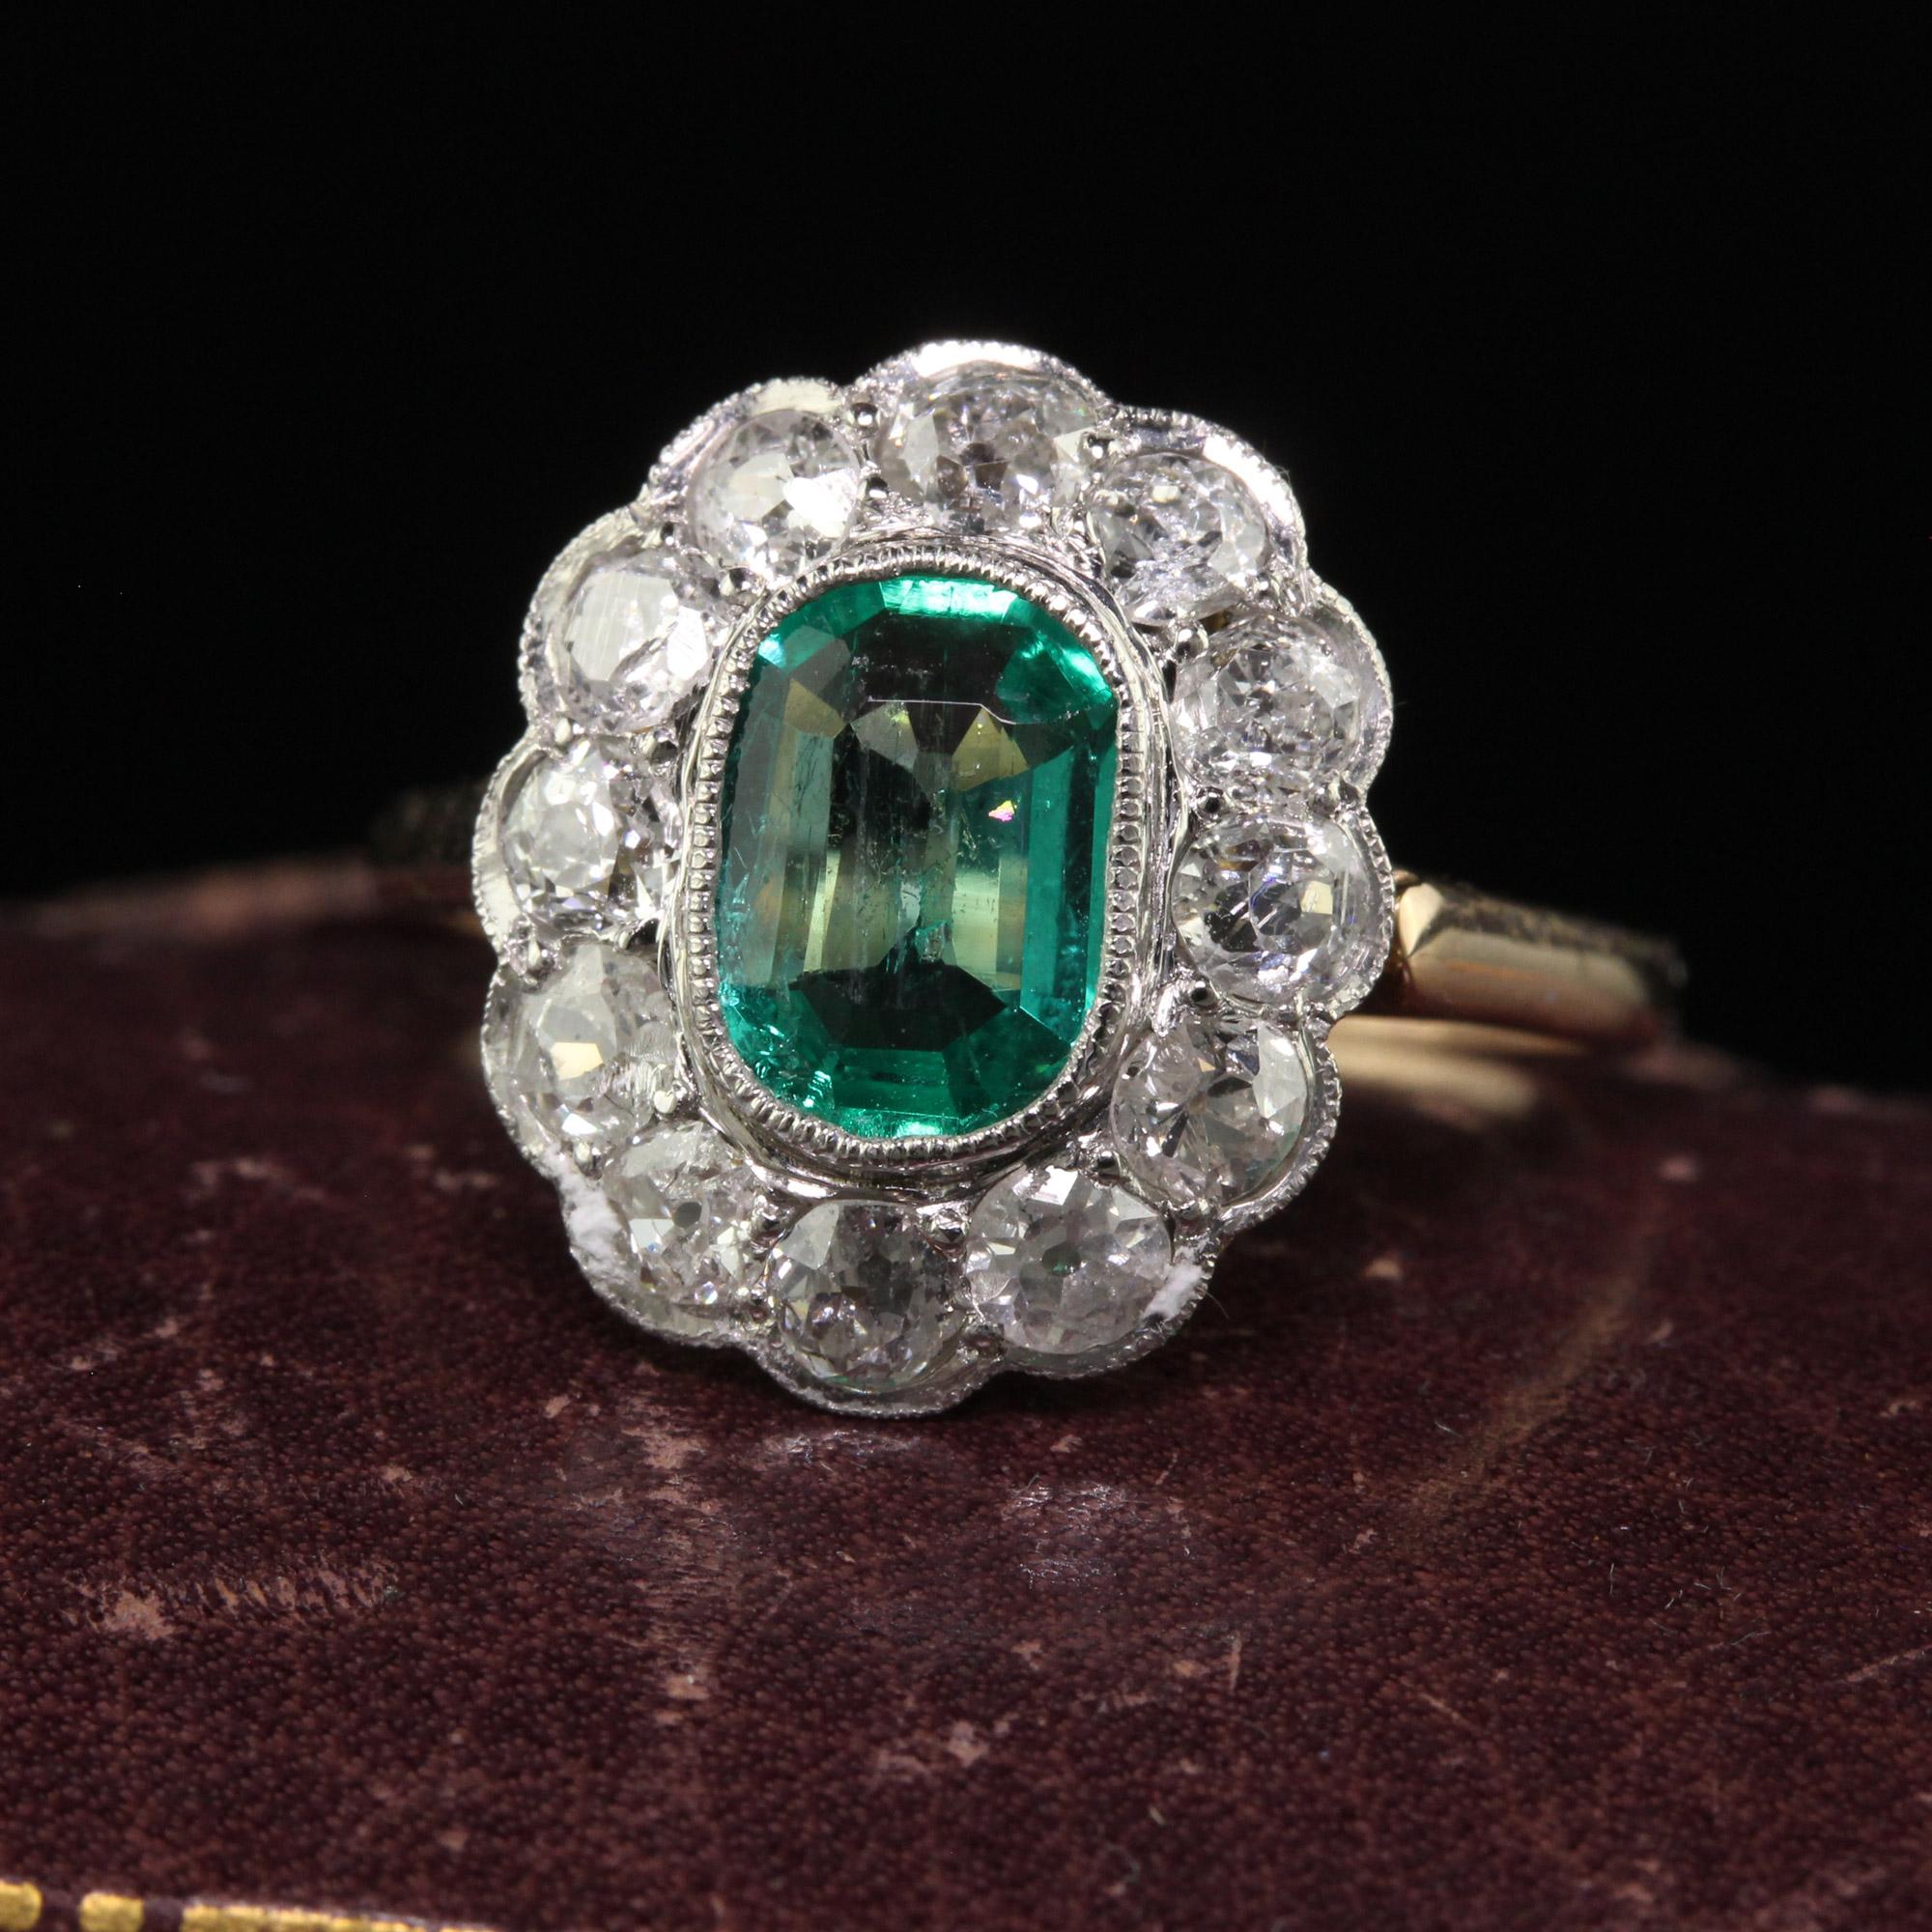 Beautiful Antique Art Deco 14K Yellow Gold Old Mine Diamond and Emerald Engagement Ring. This incredible art deco engagement ring is crafted in 14k yellow gold. The center holds a natural green antique cushion emerald and is surrounded why beautiful